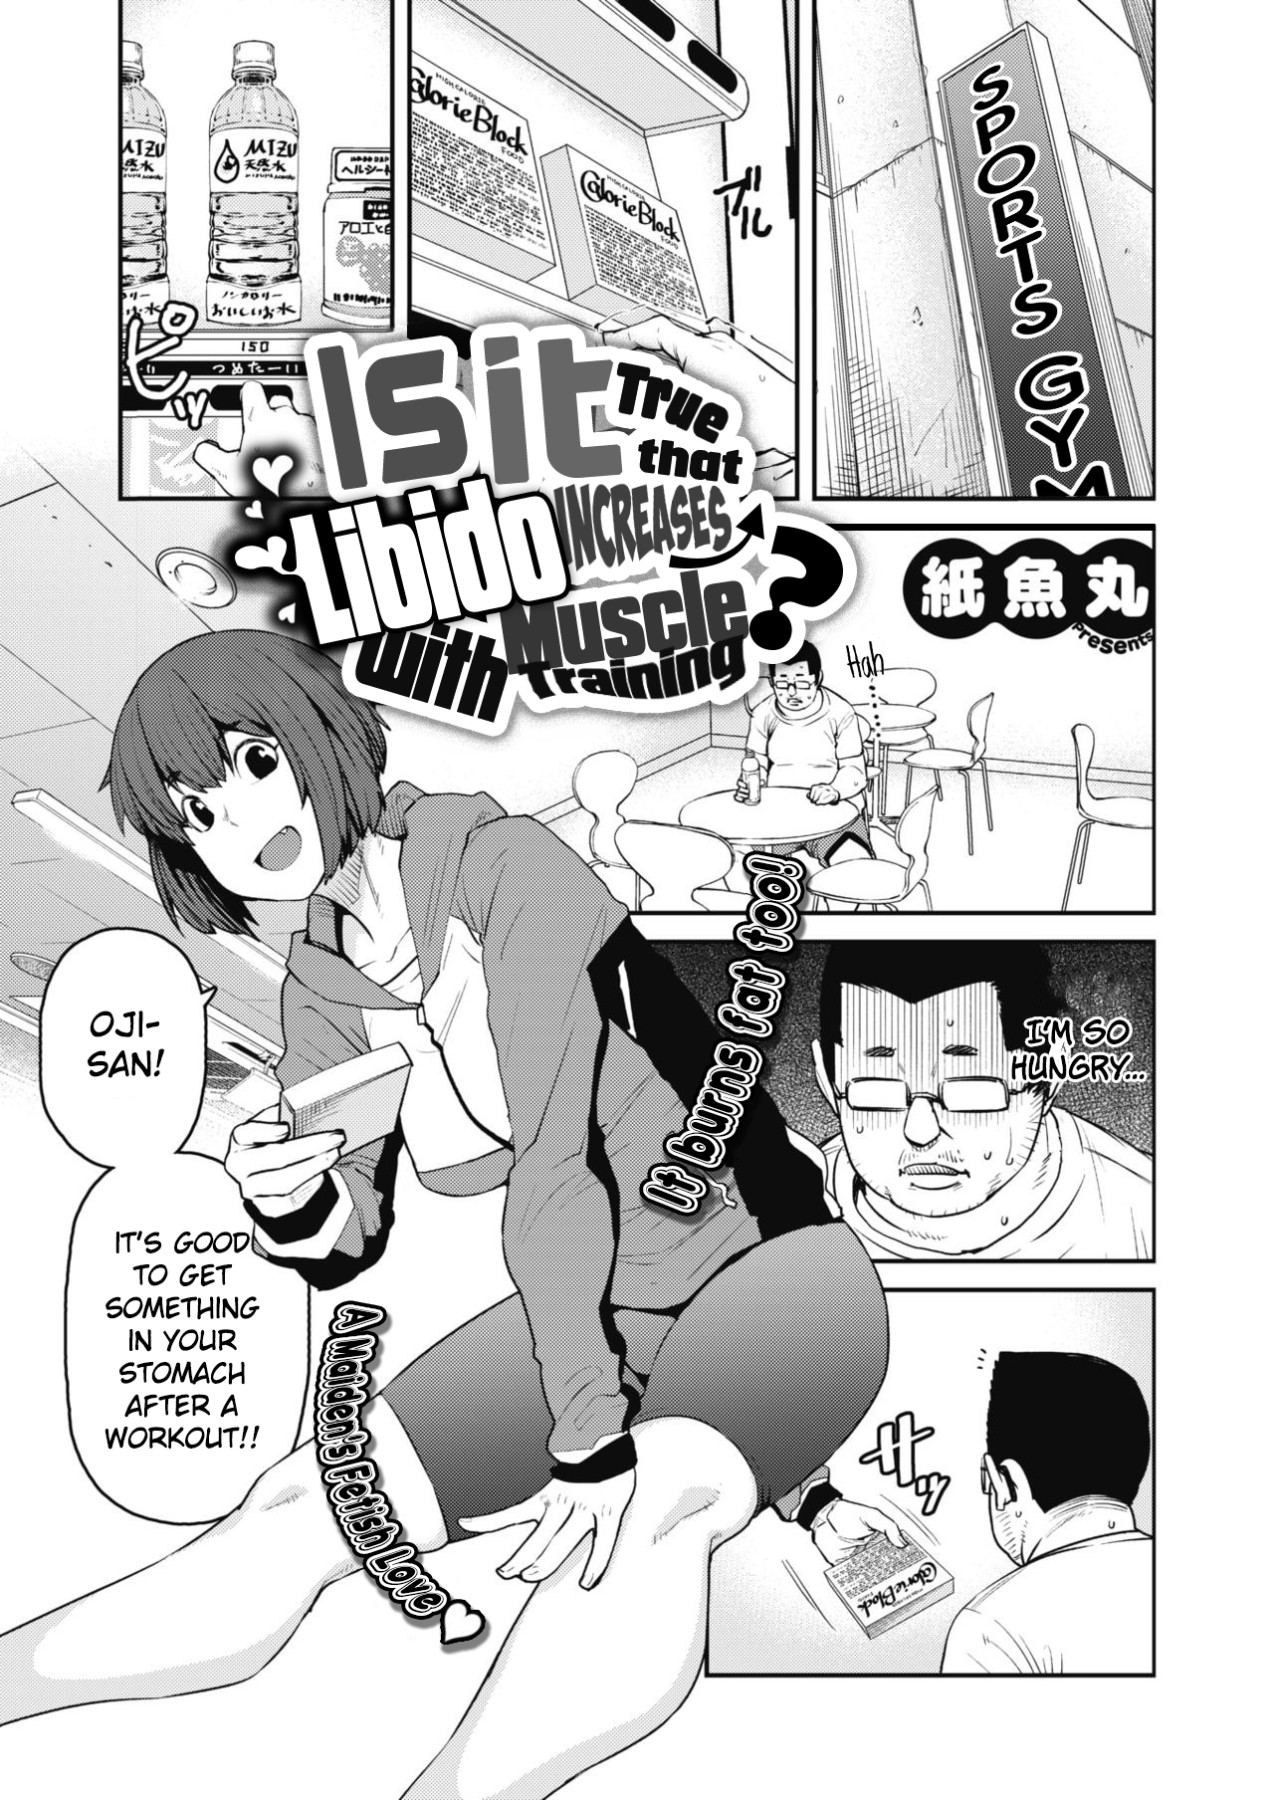 Hentai Manga Comic-Is It True that Libido Increases With Muscle Training-Read-1